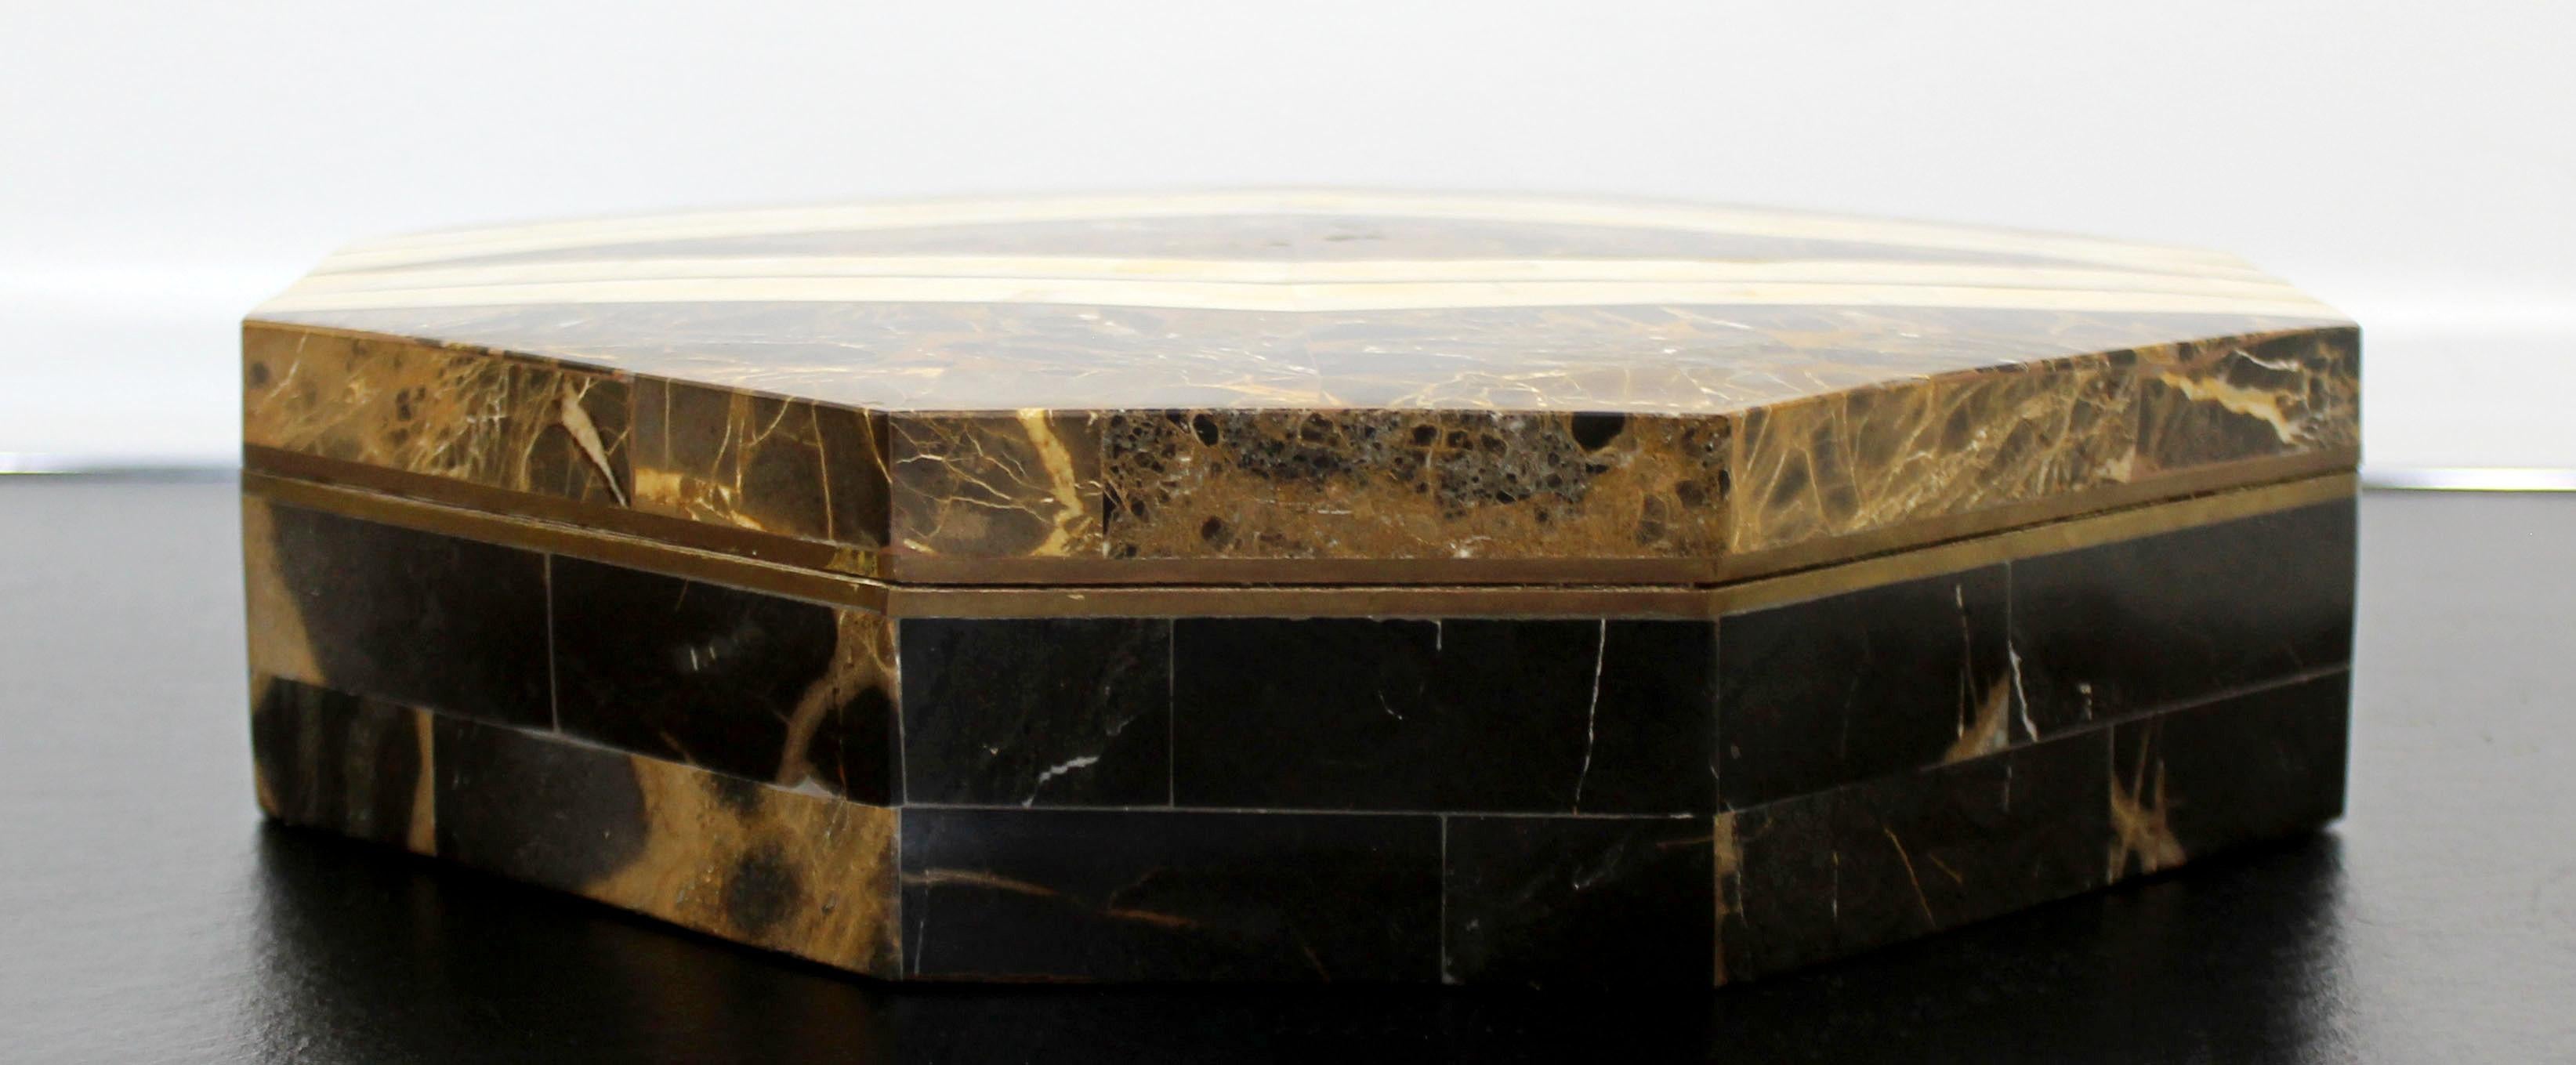 For your consideration is a fantastic lidded box, made of brass and tessellated stone over wood, by Robert Marcius for Casa Bique, circa 1970s. In excellent condition. The dimensions are 13